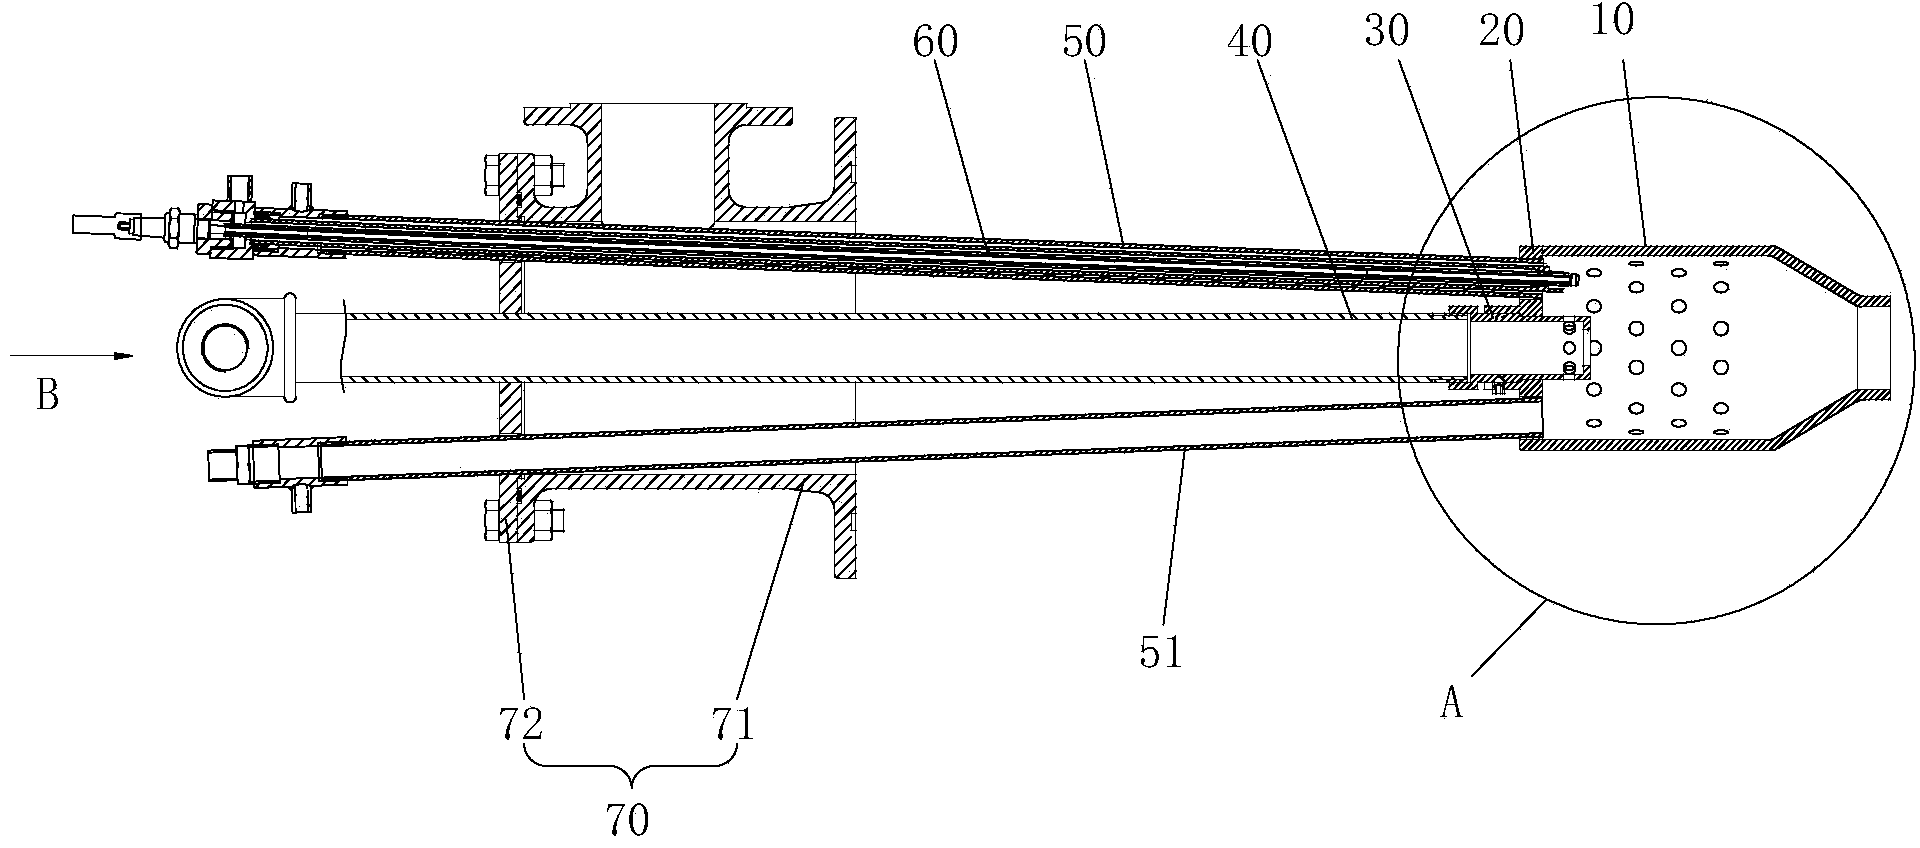 Low-calorific-value gas radiating tube burner and control method thereof